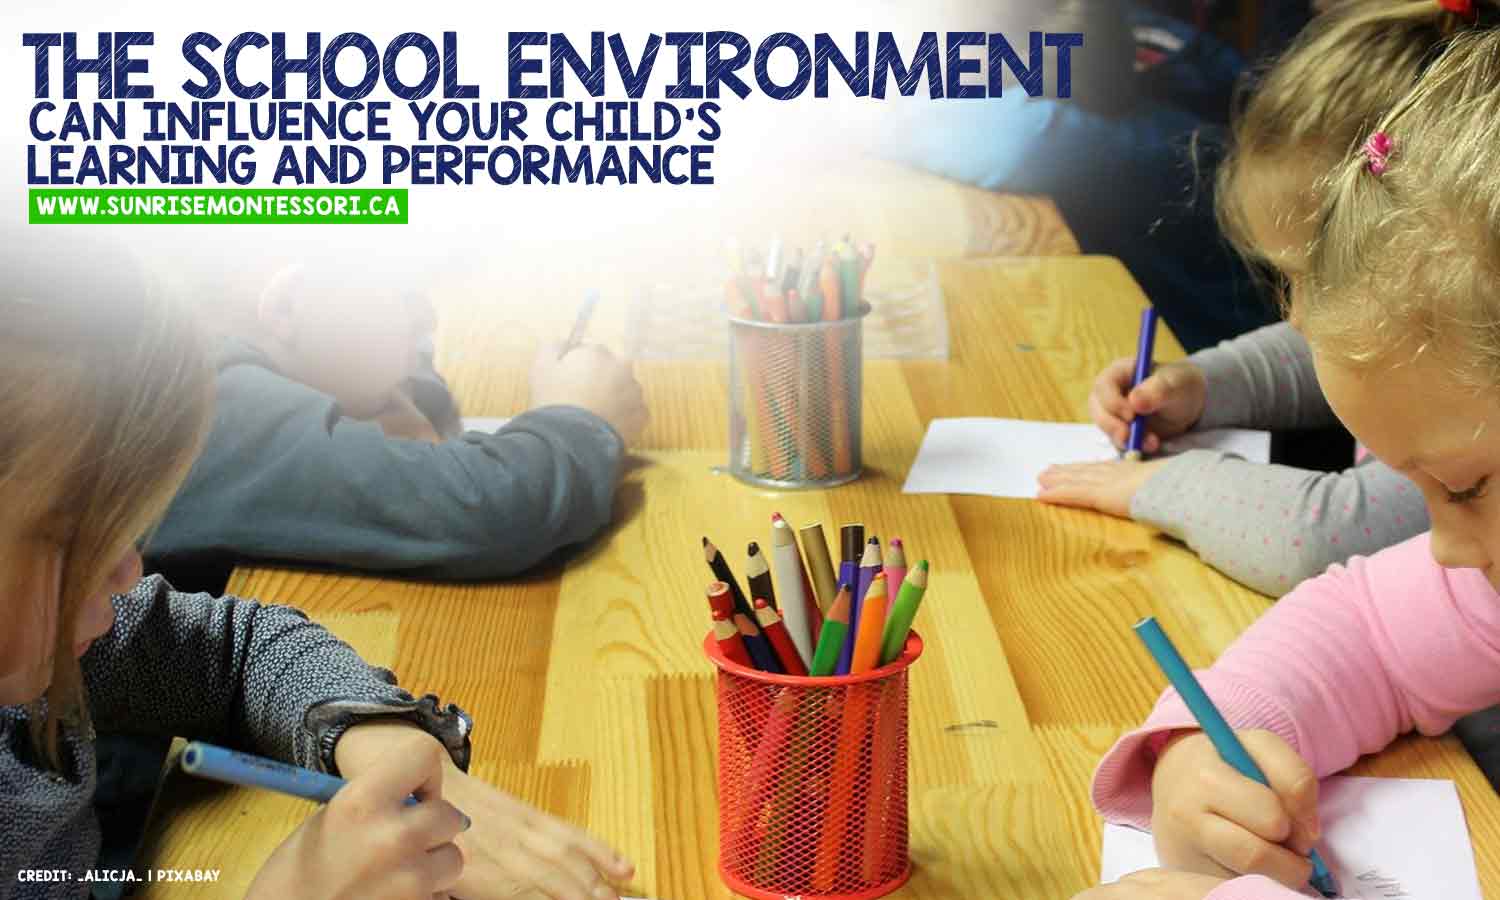 The school environment can influence your child’s learning and performance